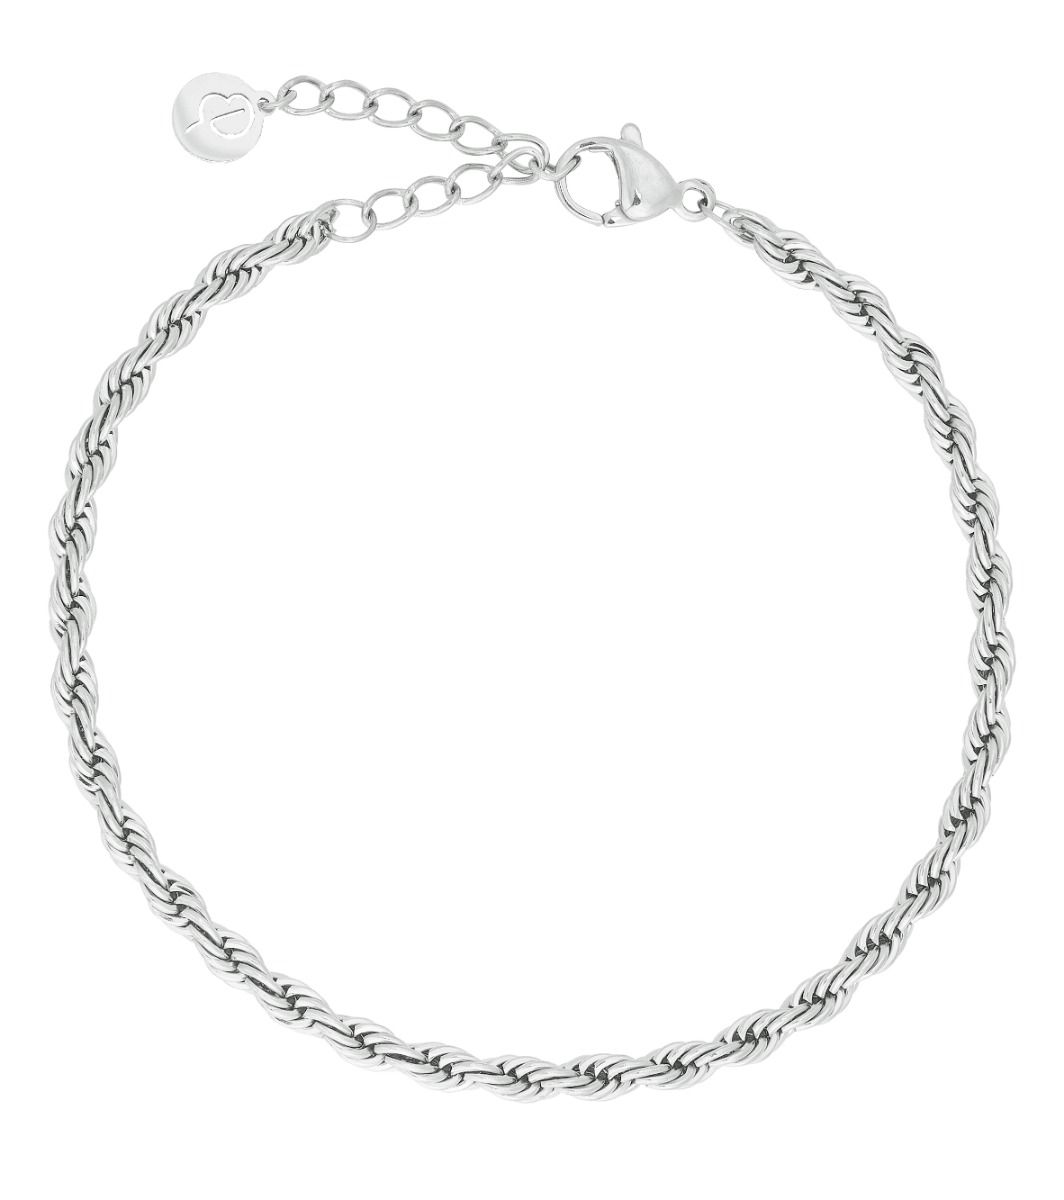 Rope chain Silver plated handmade bracelet at 800  Azilaa